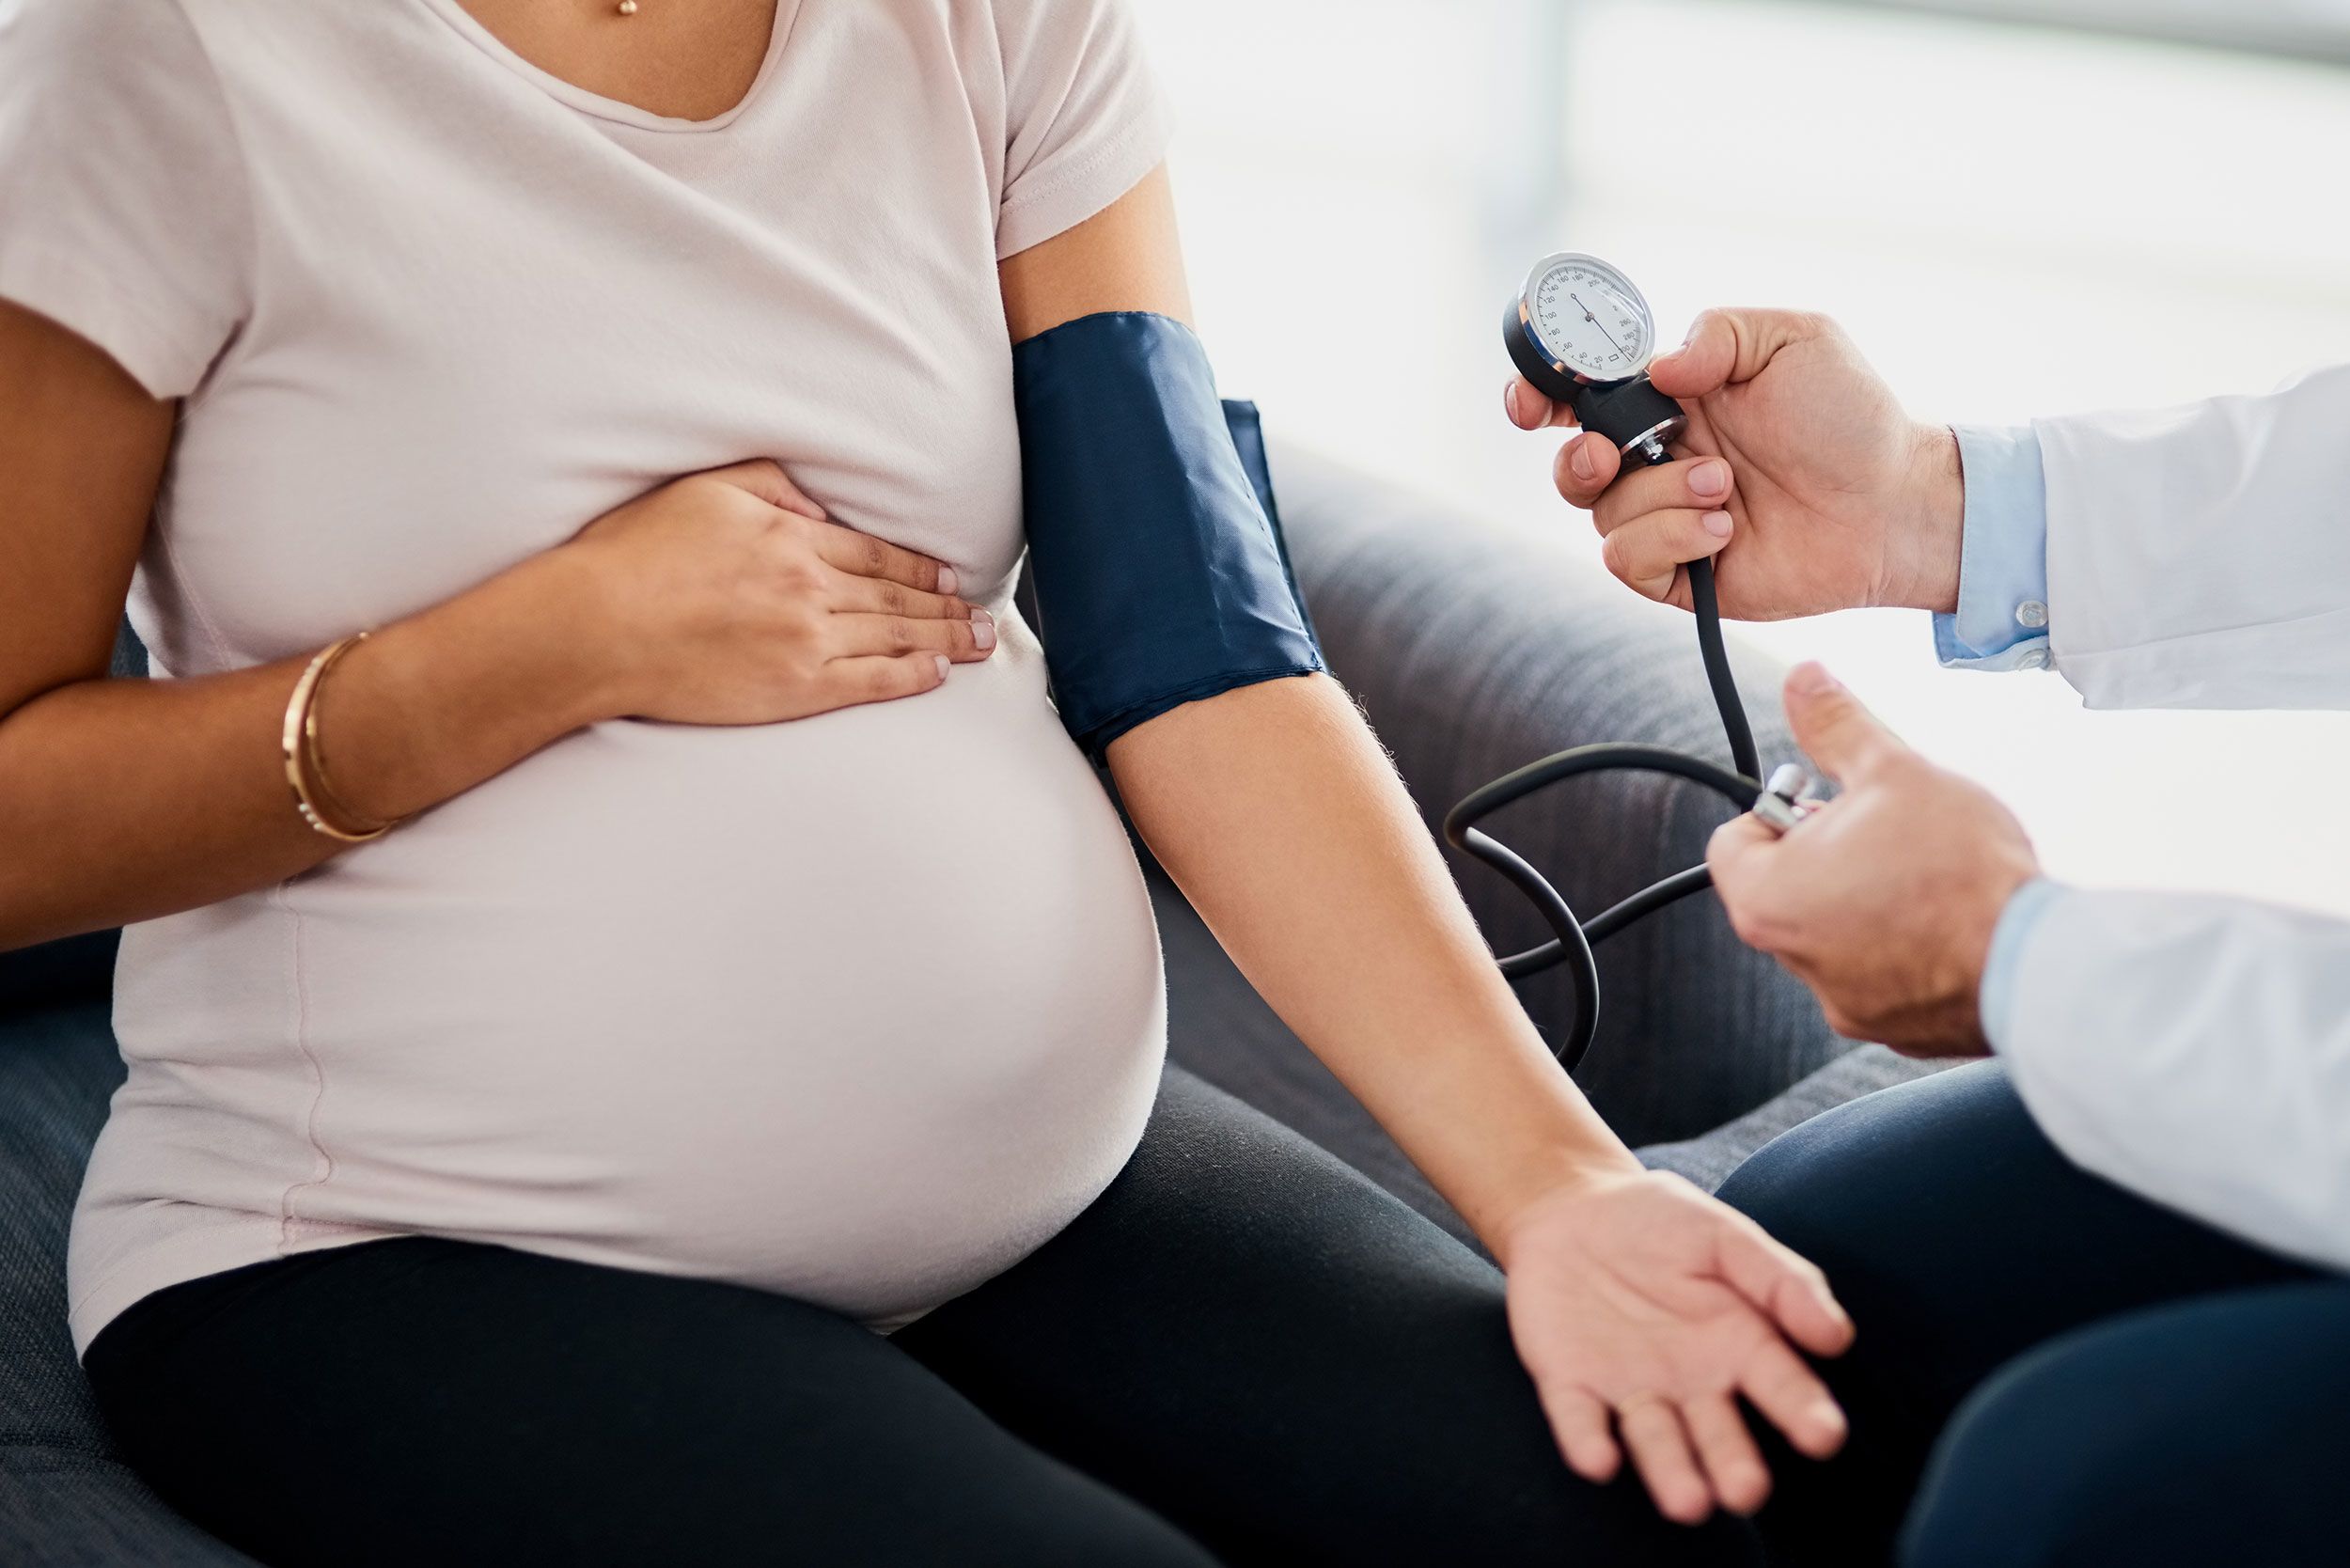 US task force recommends expanding high blood pressure screenings during  pregnancy